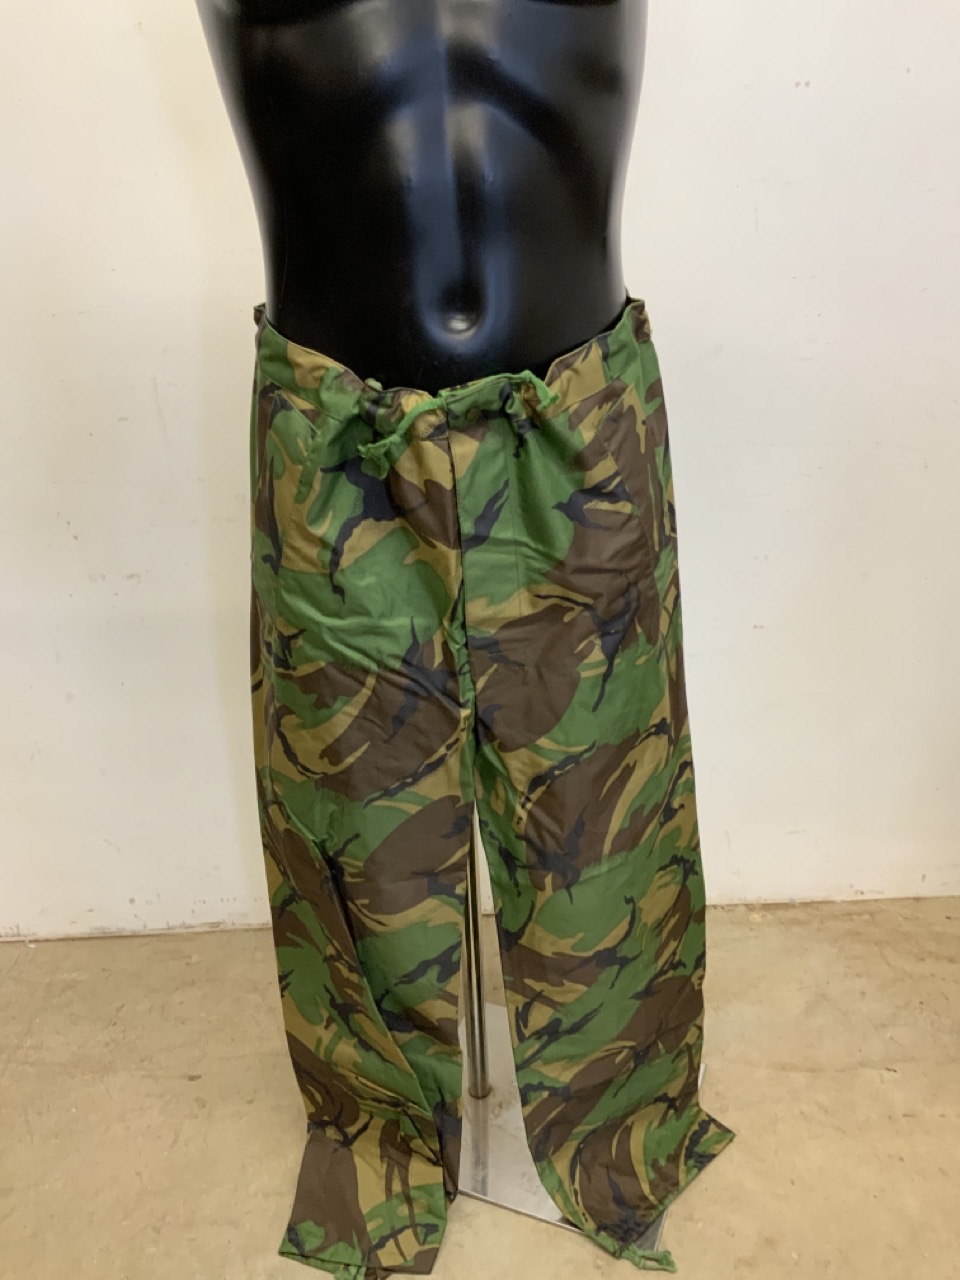 A combat smock and trousers. Size 180/104. Cotton smock - waterproof trousers - Image 7 of 7